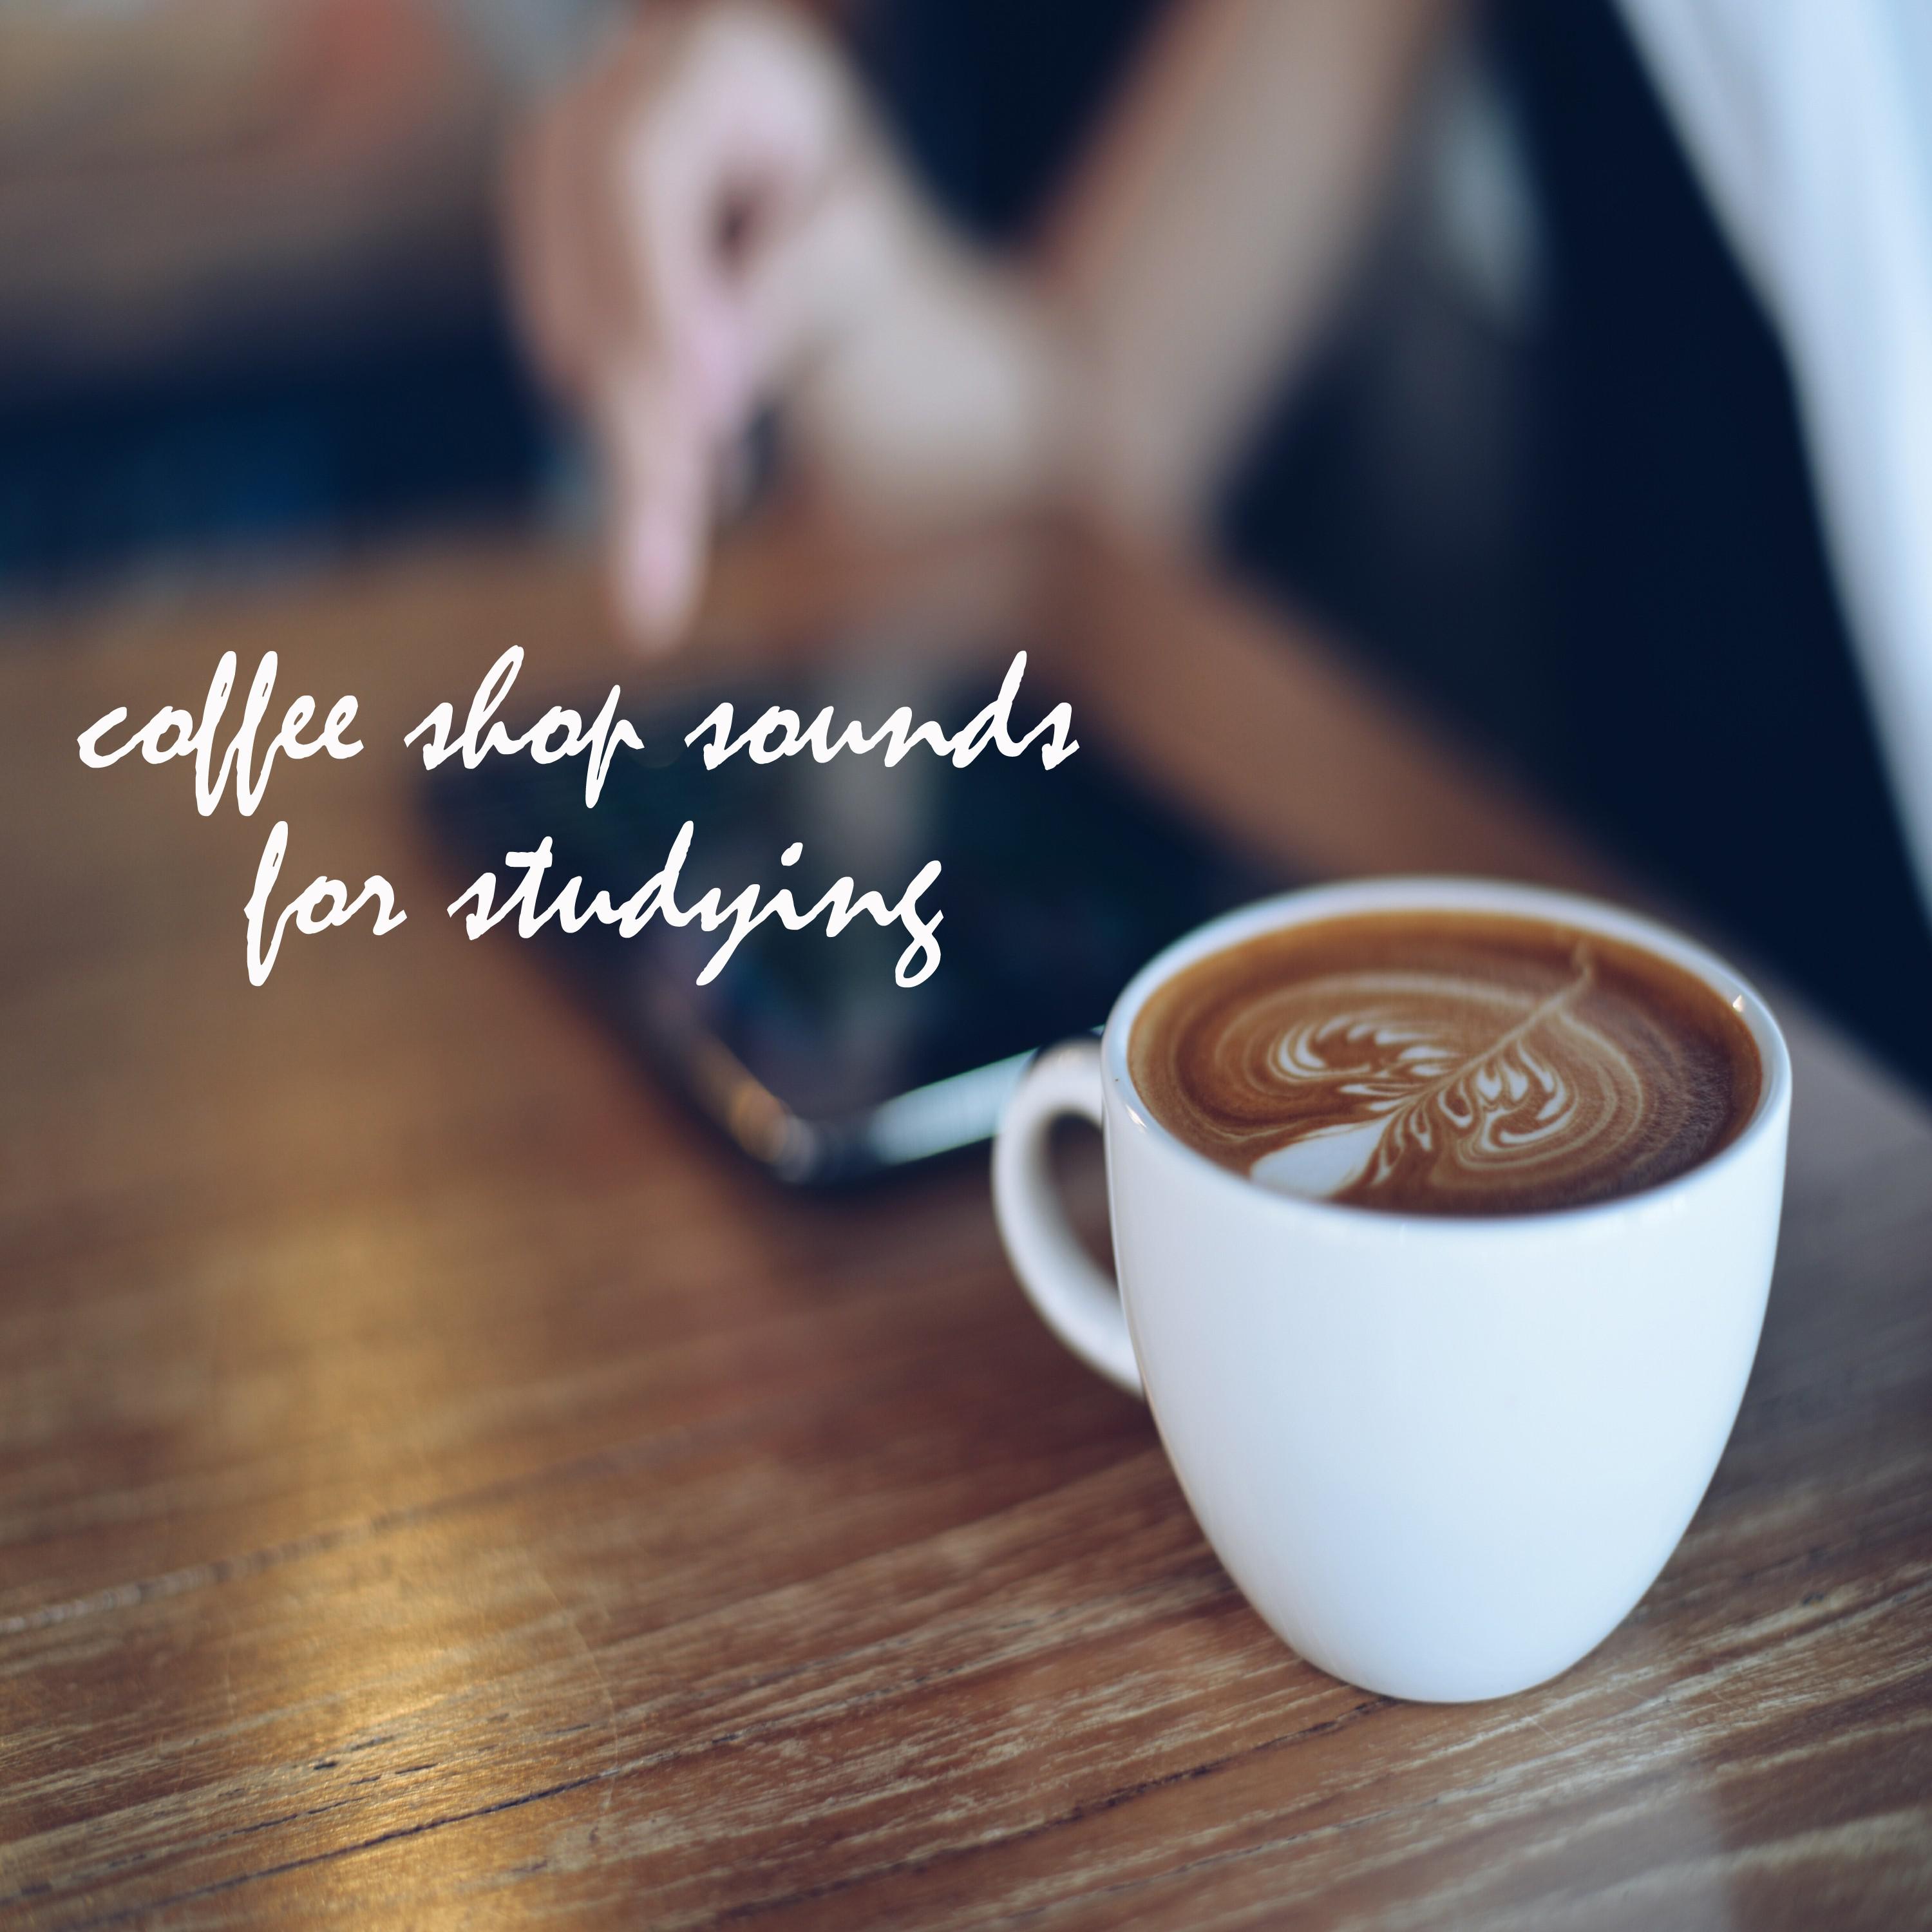 Coffee Shop Sounds for Studying and Working, Pt. 16